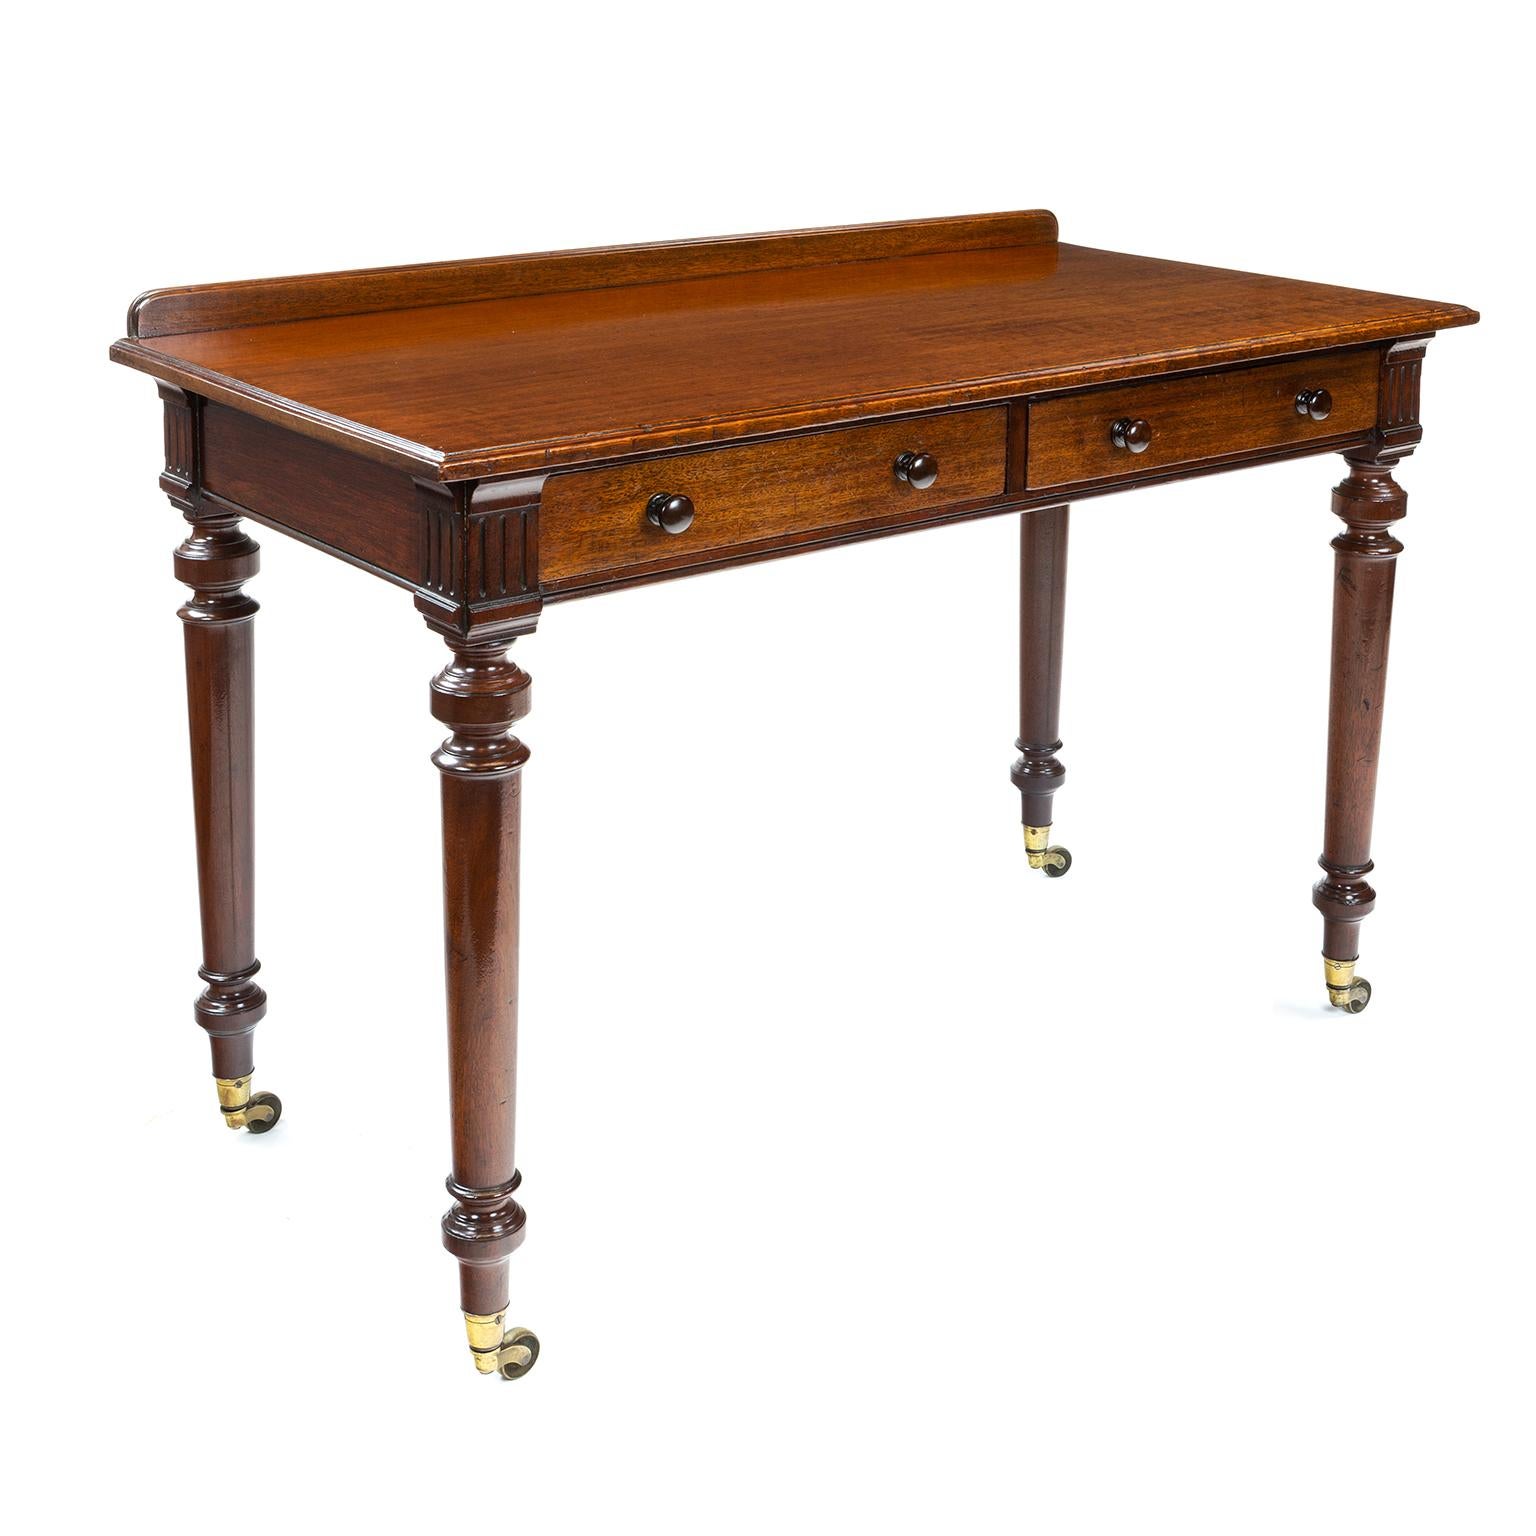 British Gillows Mahogany Two Draw Side or Writing Table, 1860/70